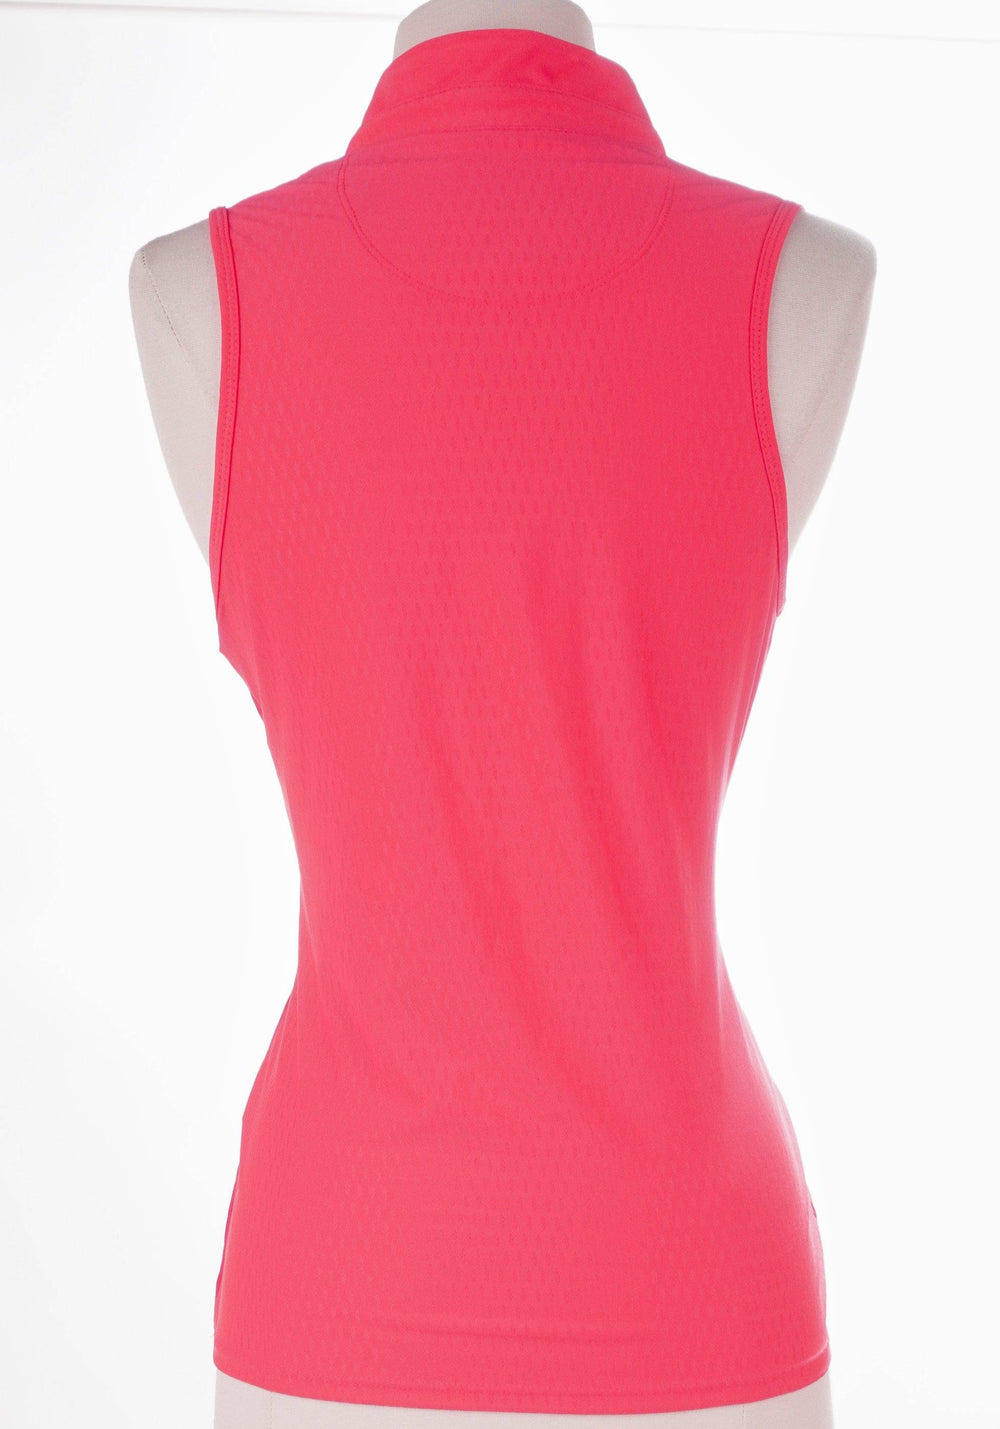 Lucky in Love Small / Neon Pink / Exclusive New Product Lucky in Love Chi Chi Tank - Neon Pink - Size Small